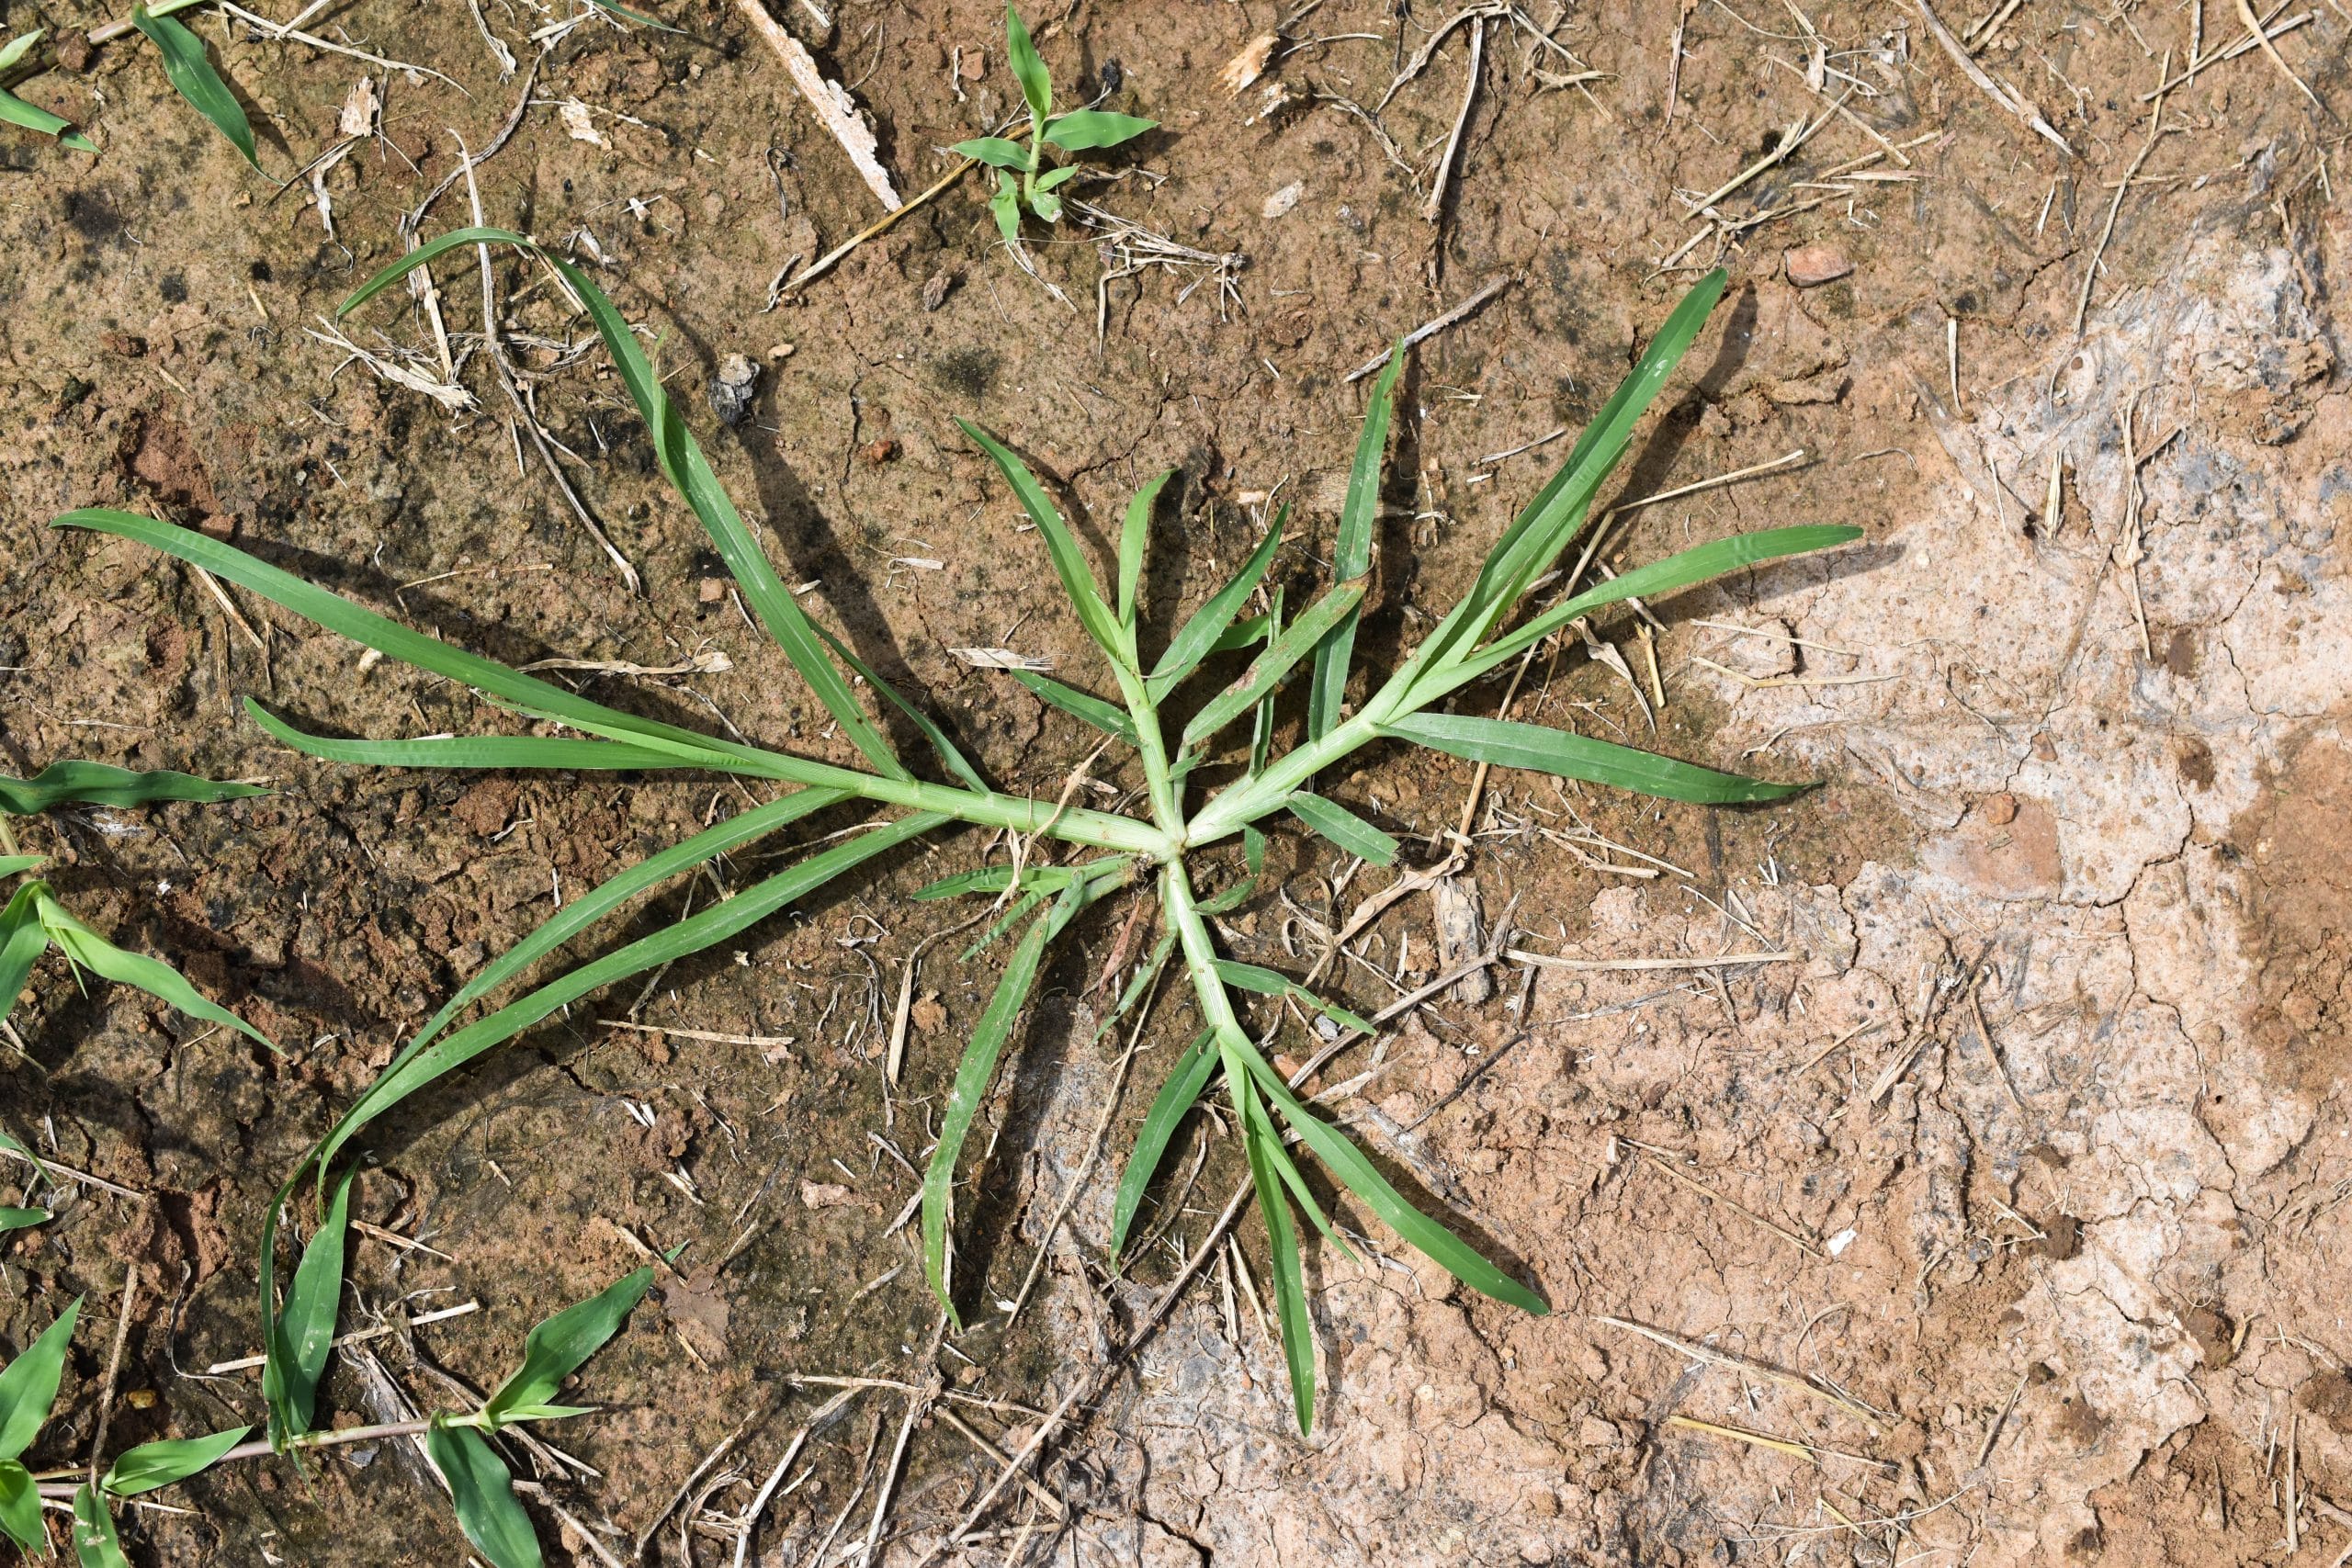 Goosegrass Identification Guide (Look for these 5 things!)